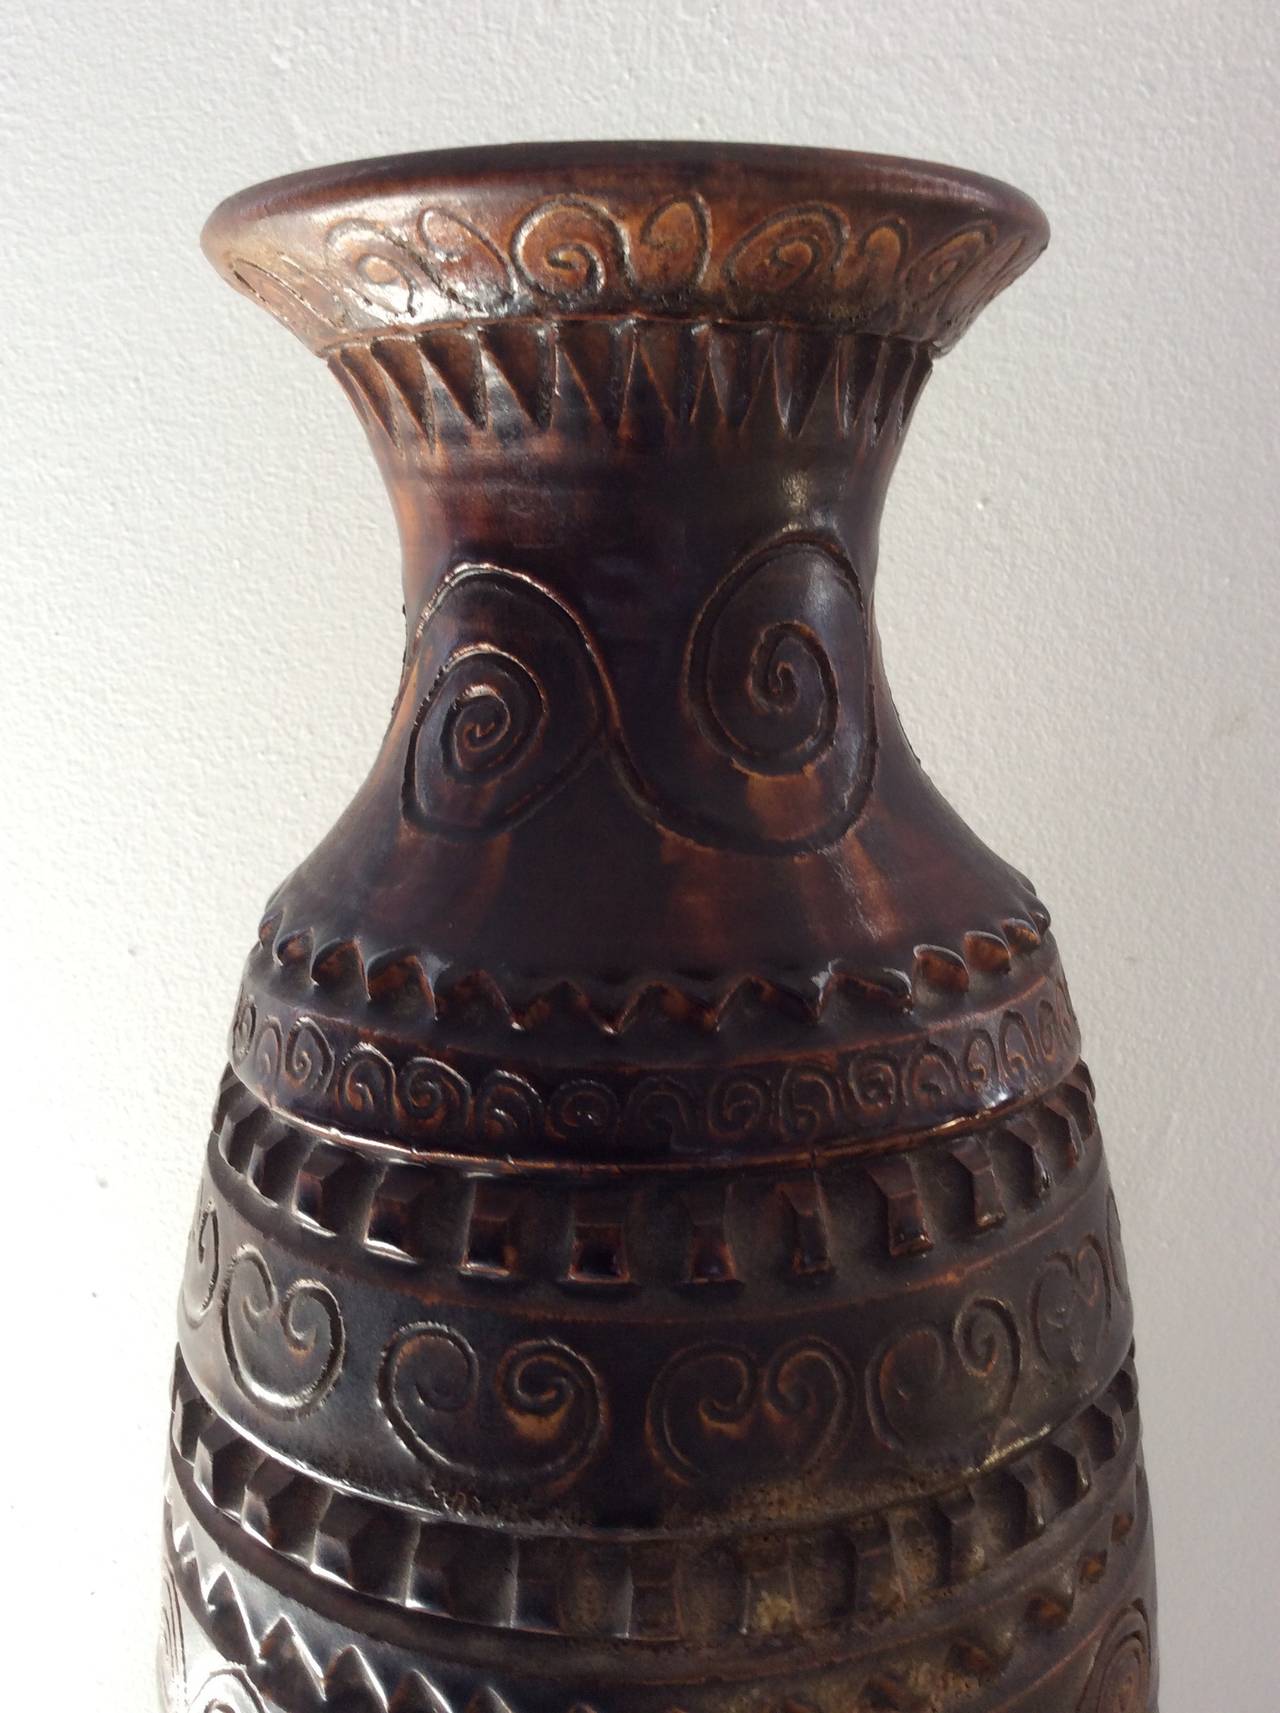 Earthenware Vase Engraved Patterns , Brown patina.
Perfect condition.